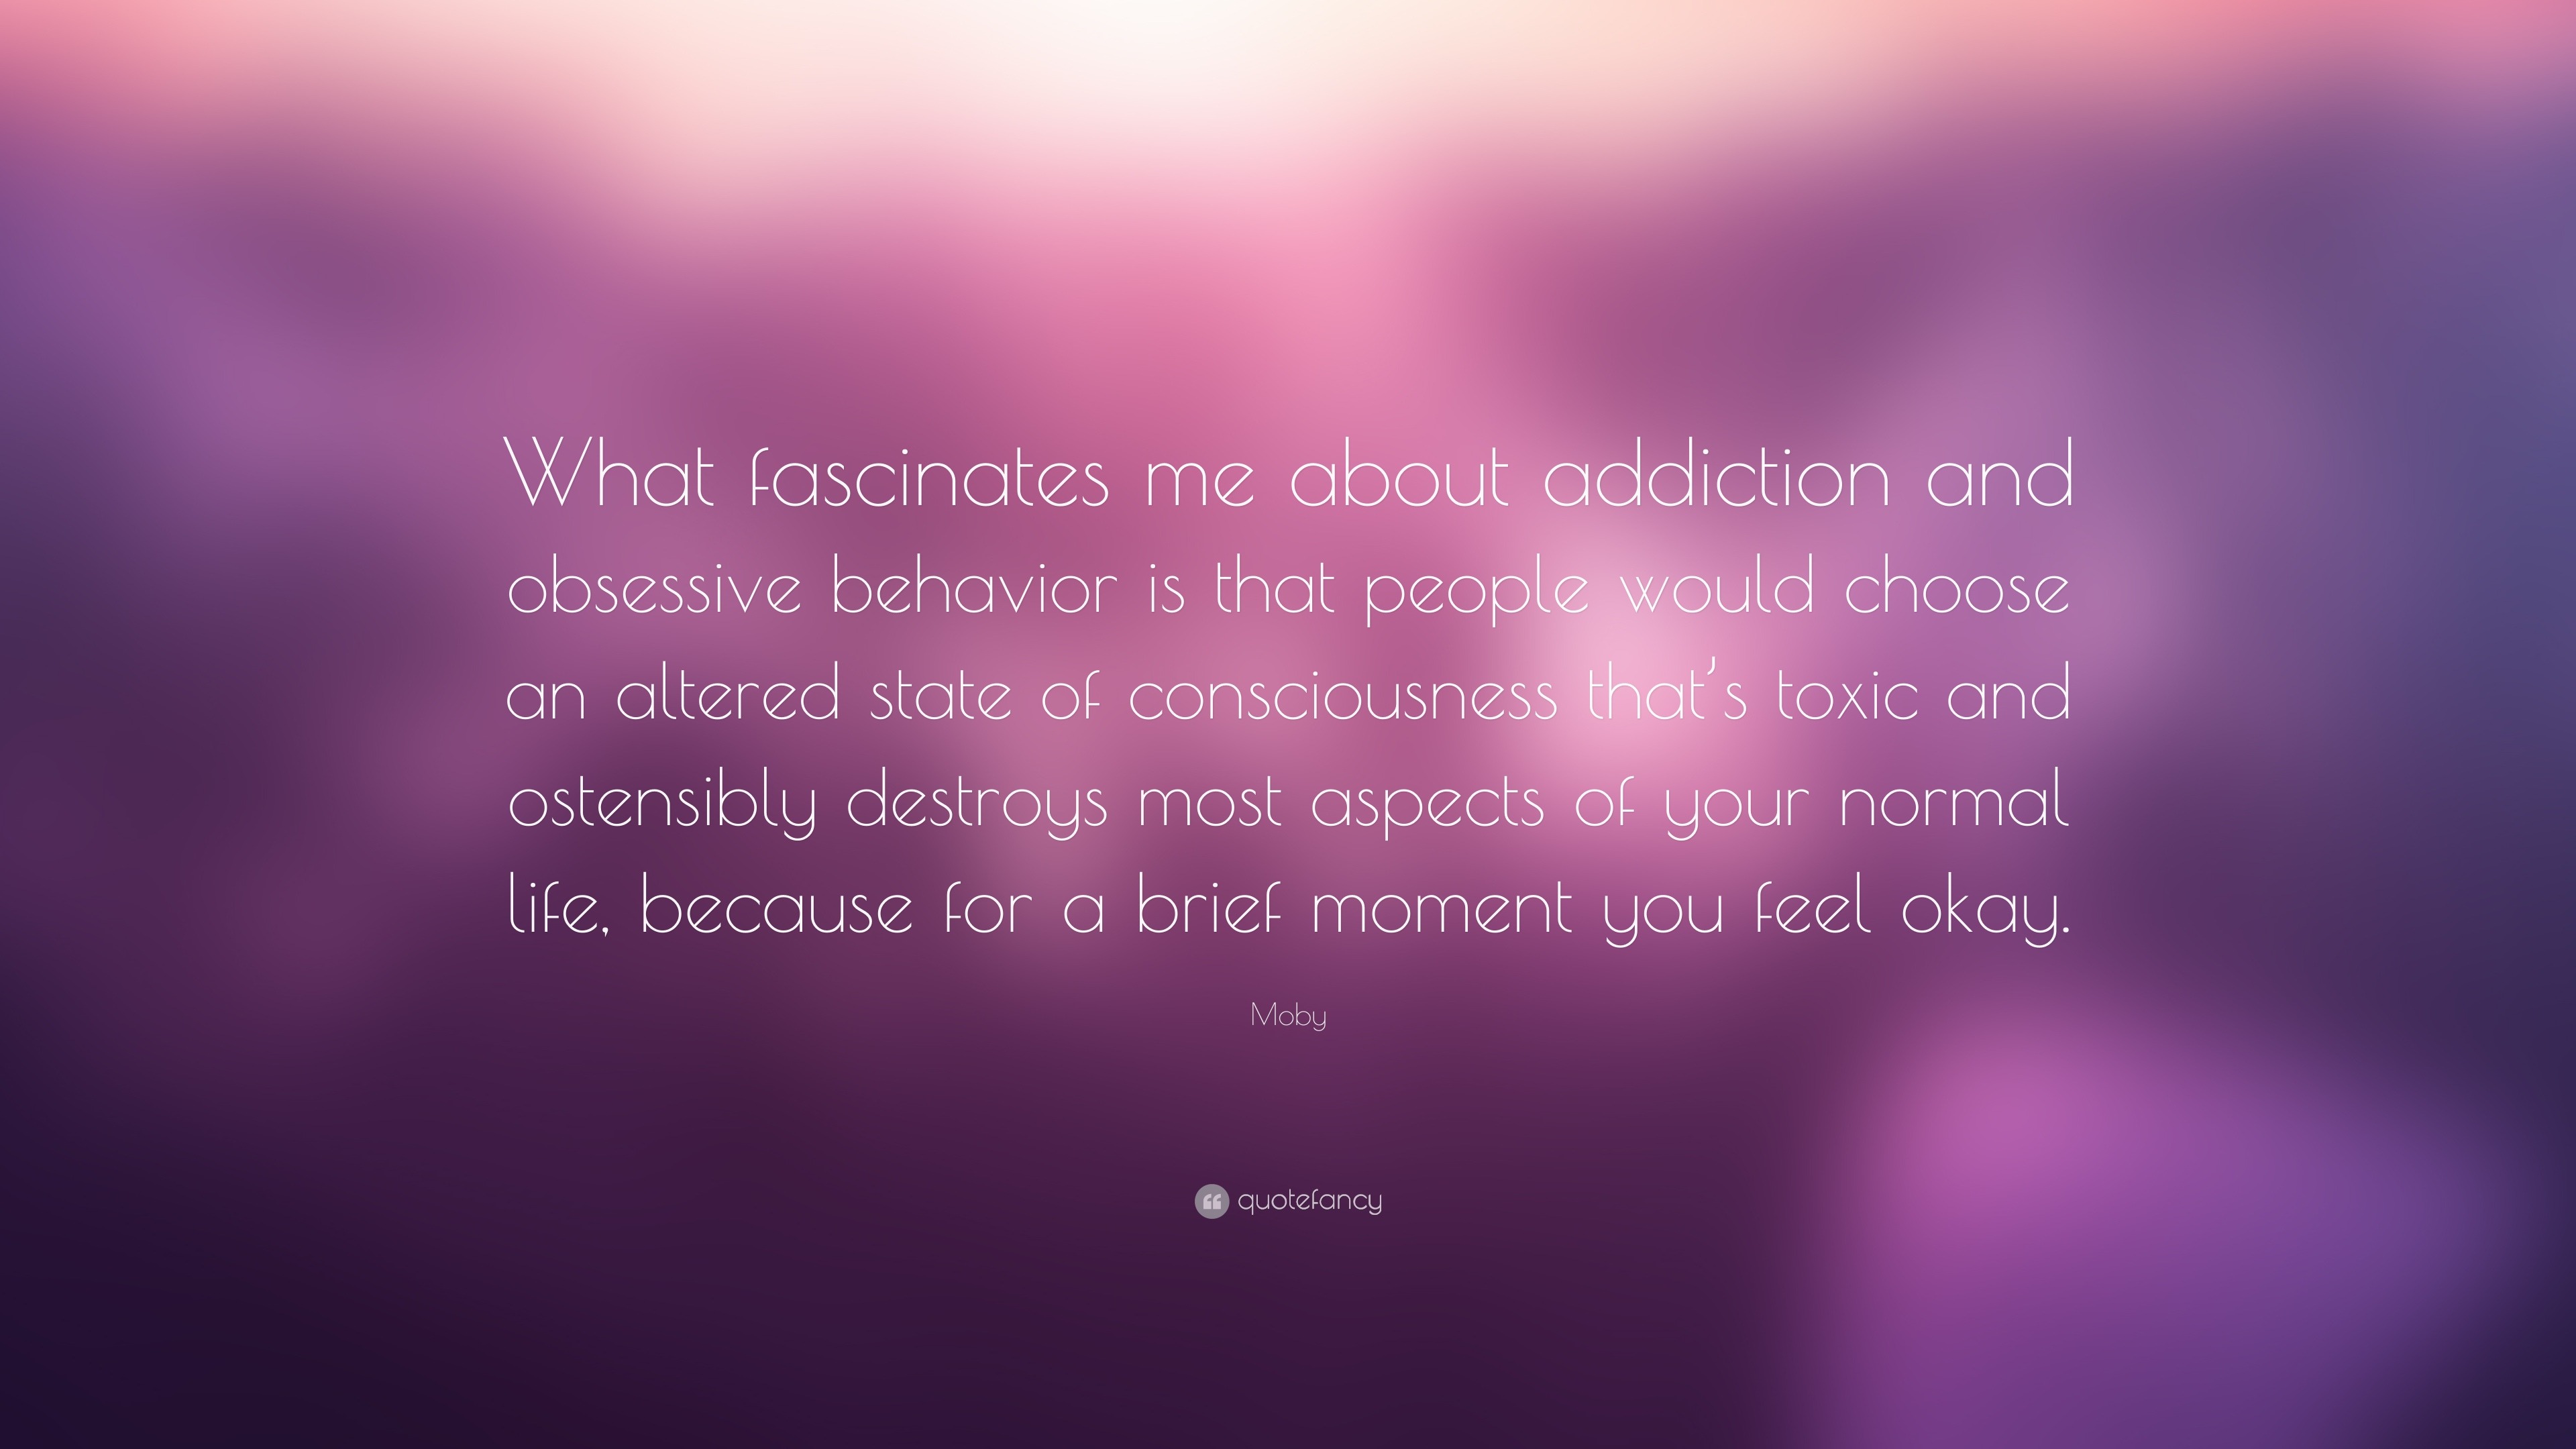 Moby Quote: “What fascinates me about addiction and obsessive